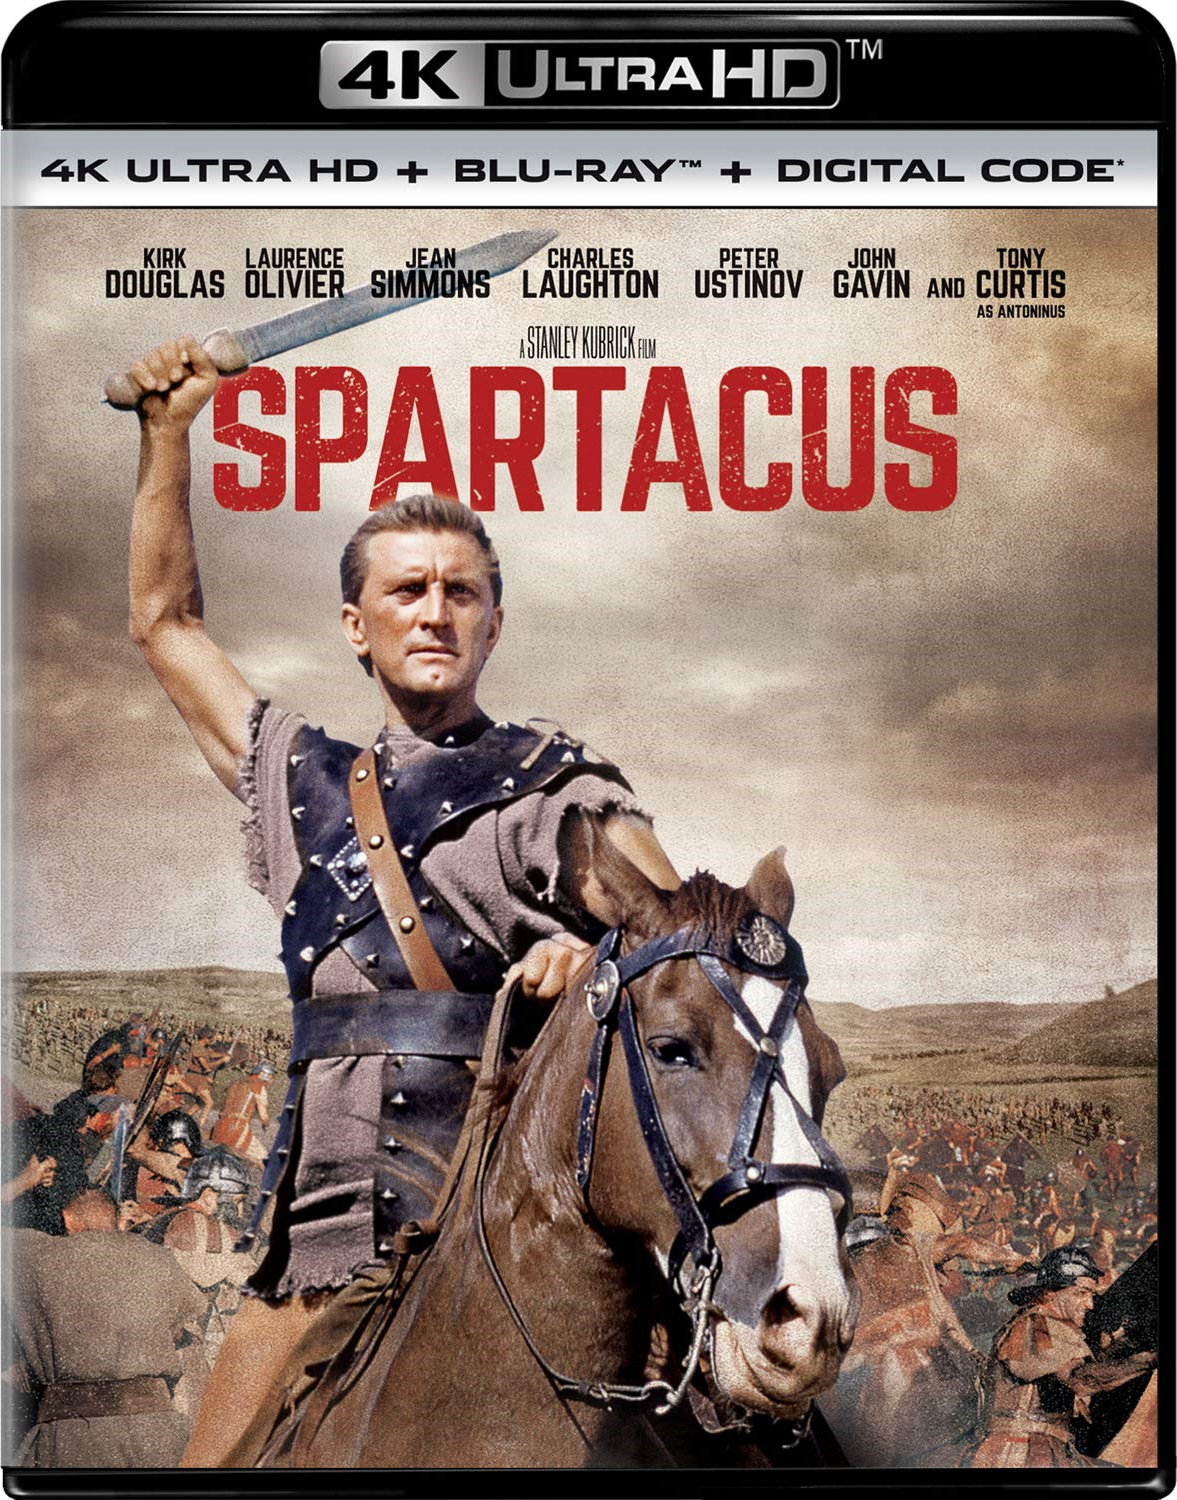 Spartacus (1960) Espartaco (1960) [DTS 5.1 + SUP] [4K UHD Blu Ray-Rip]  268566_front